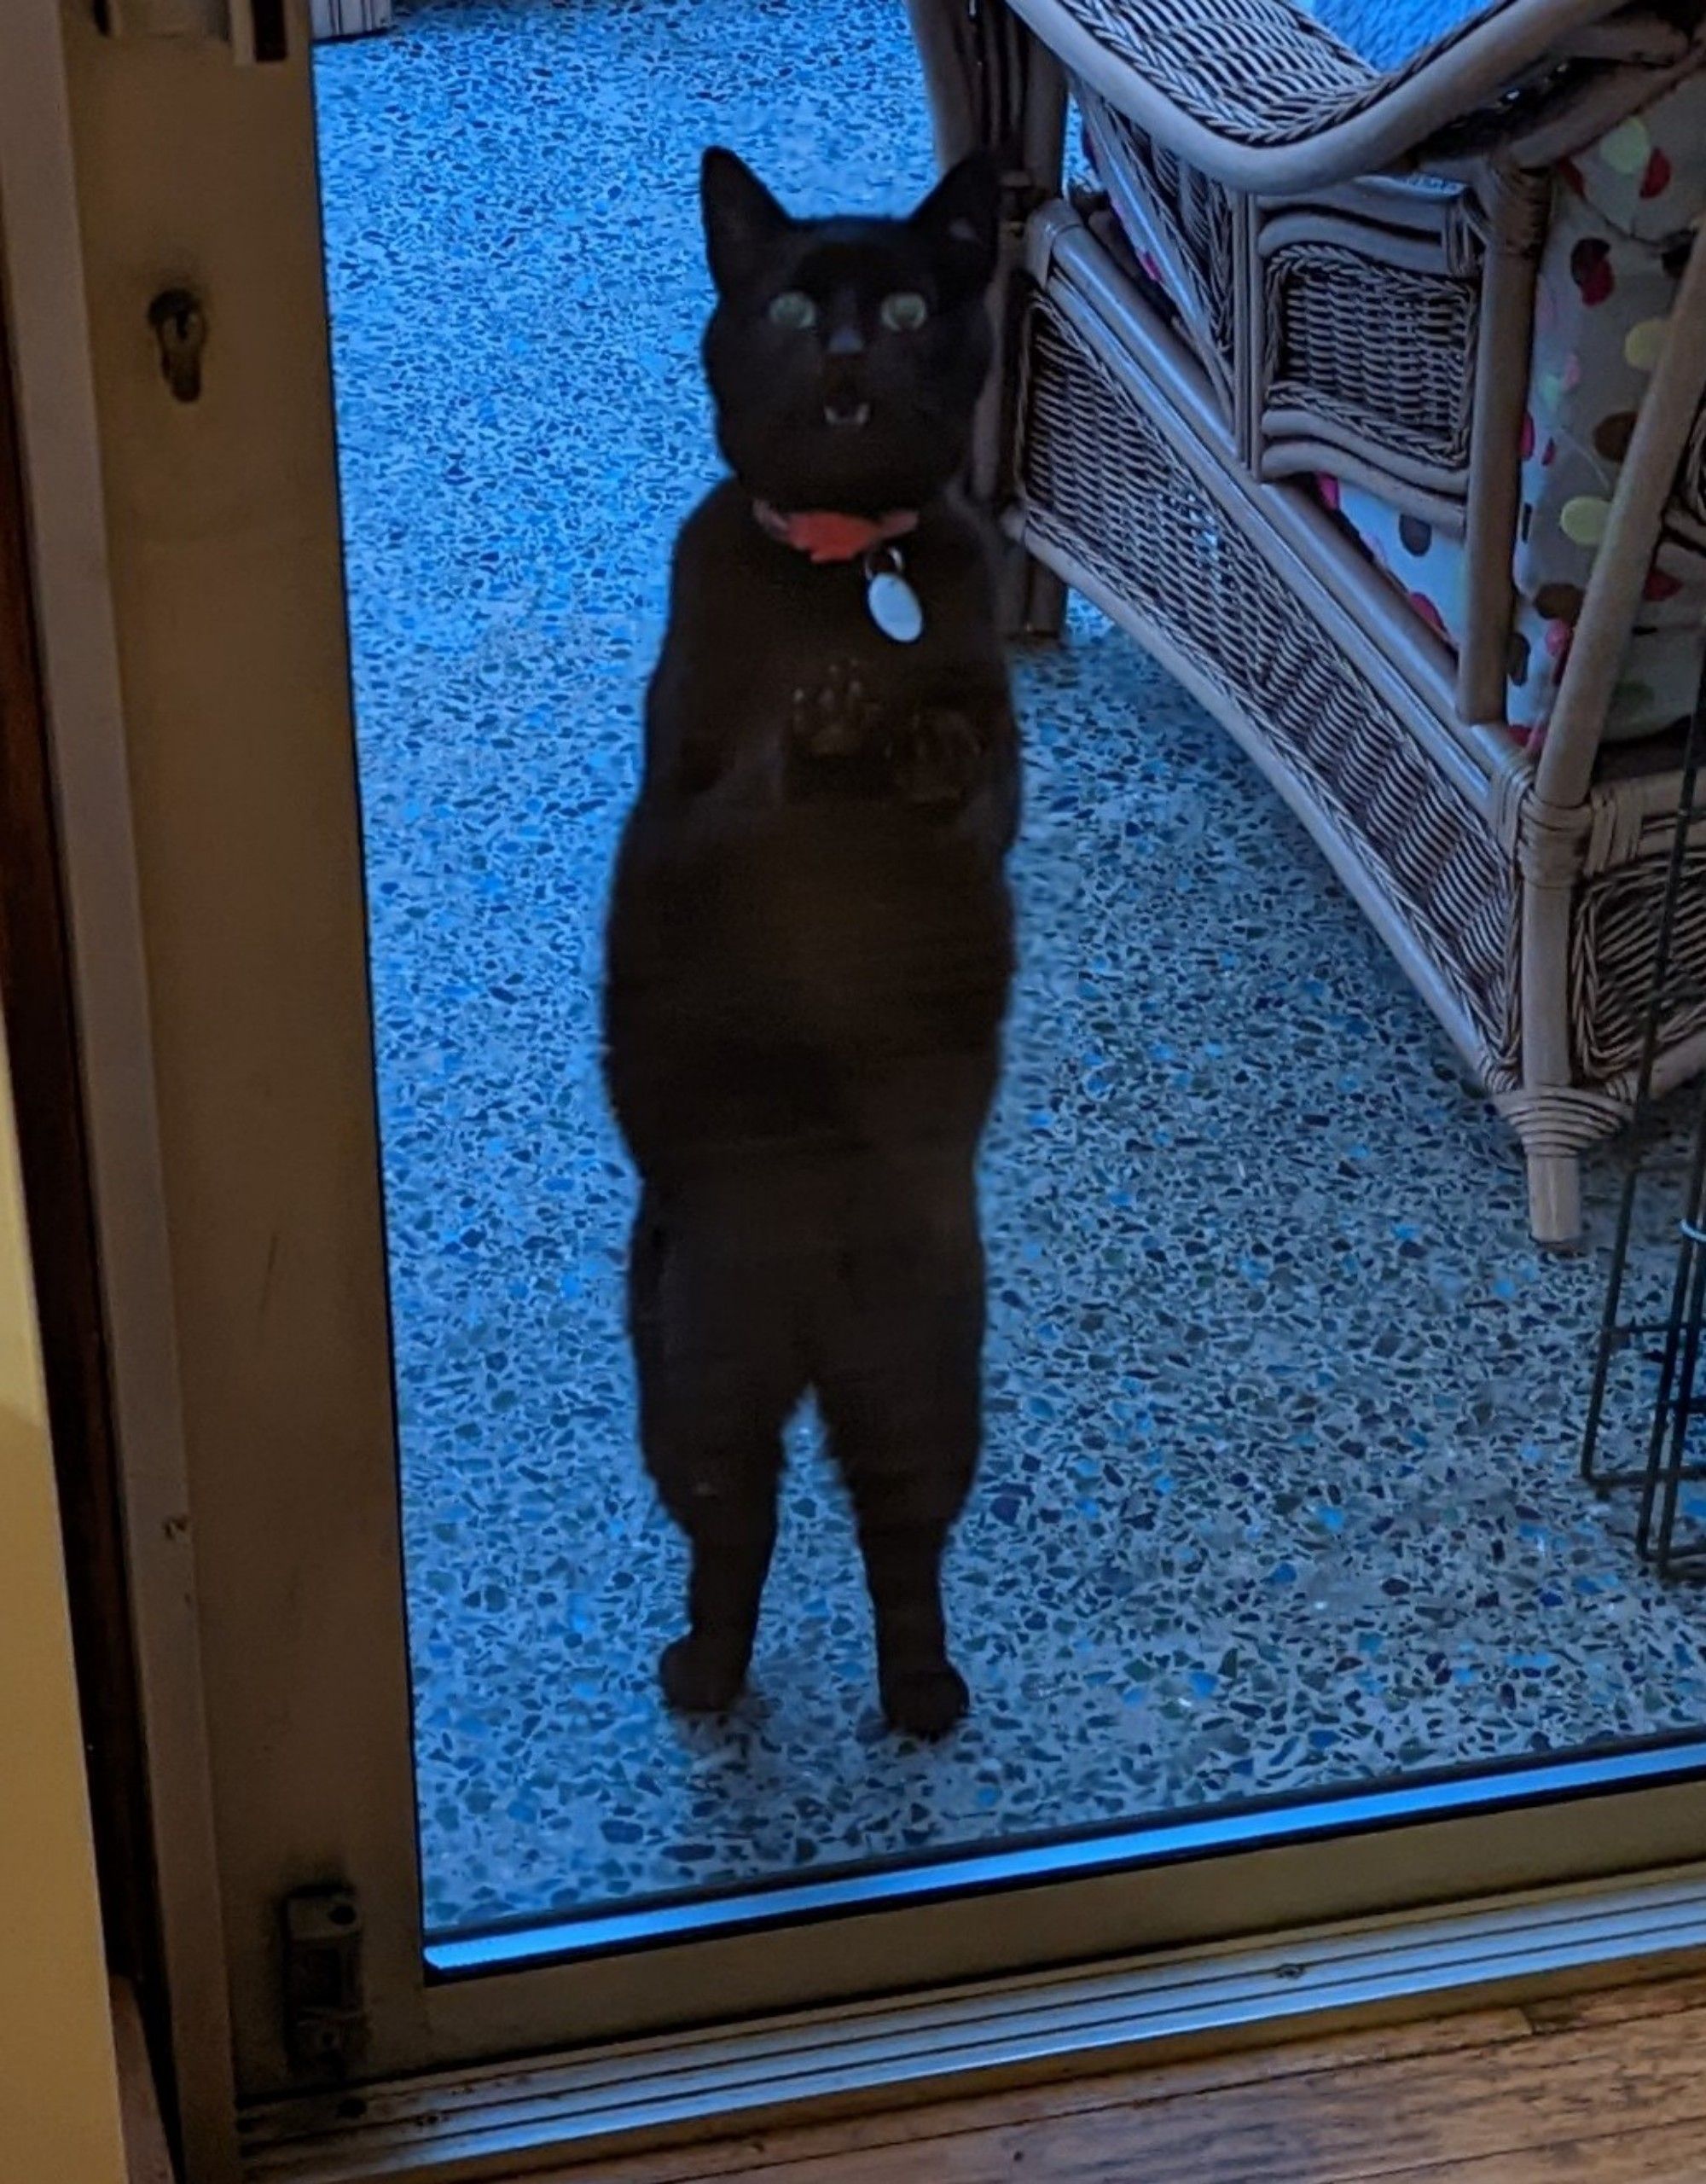 Morph the cat is in the conservatory, stretching up against the glass door and meowing to be let into the rest of the house. His belly is exposed and could do with some cuddling